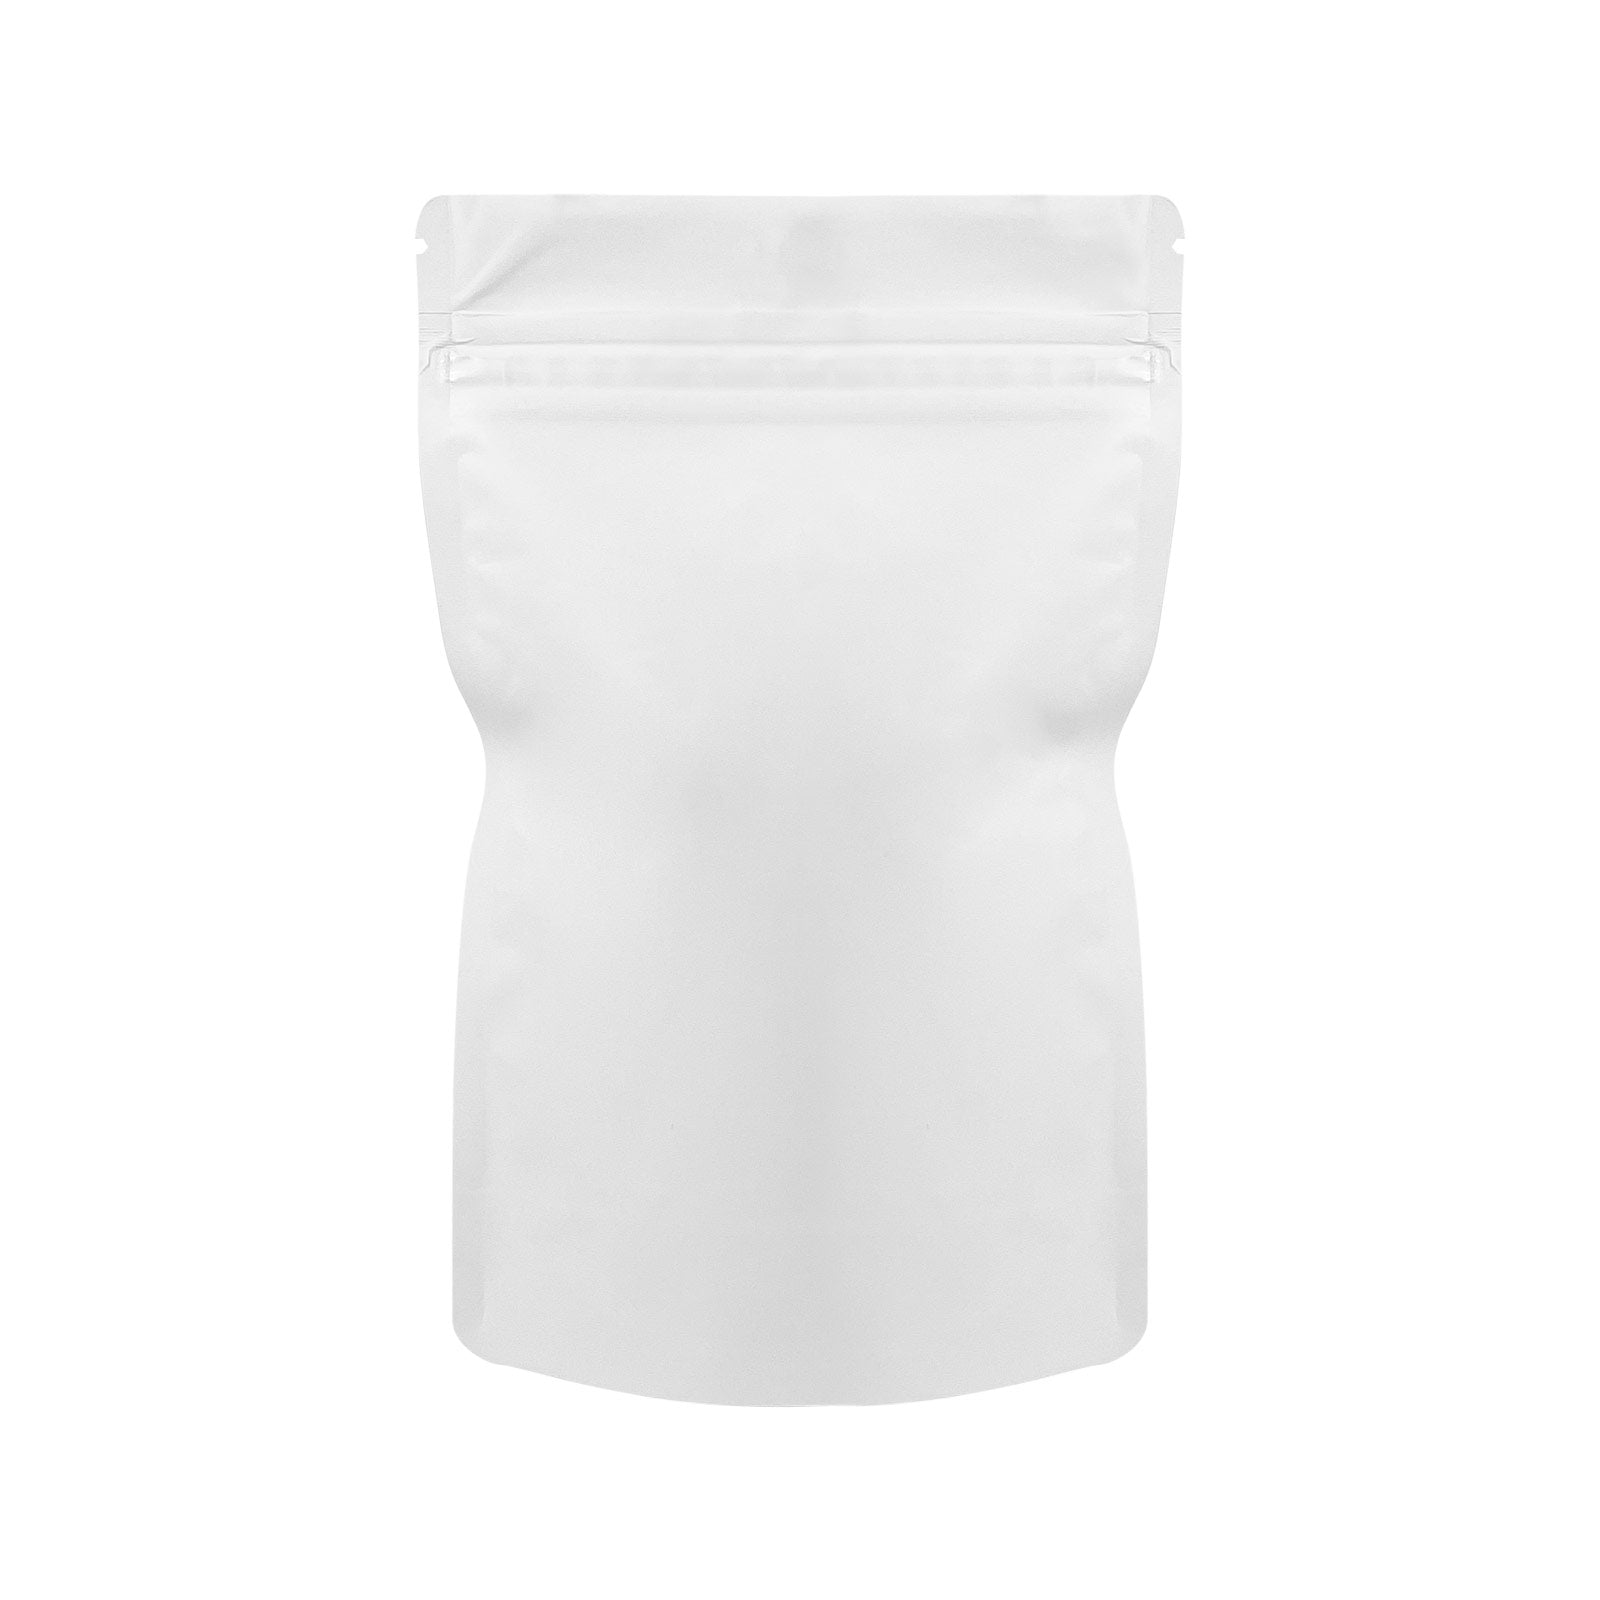 1/2 Ounce Child Resistant Bags All White 5"x8.15"+2.36" - 100 Count